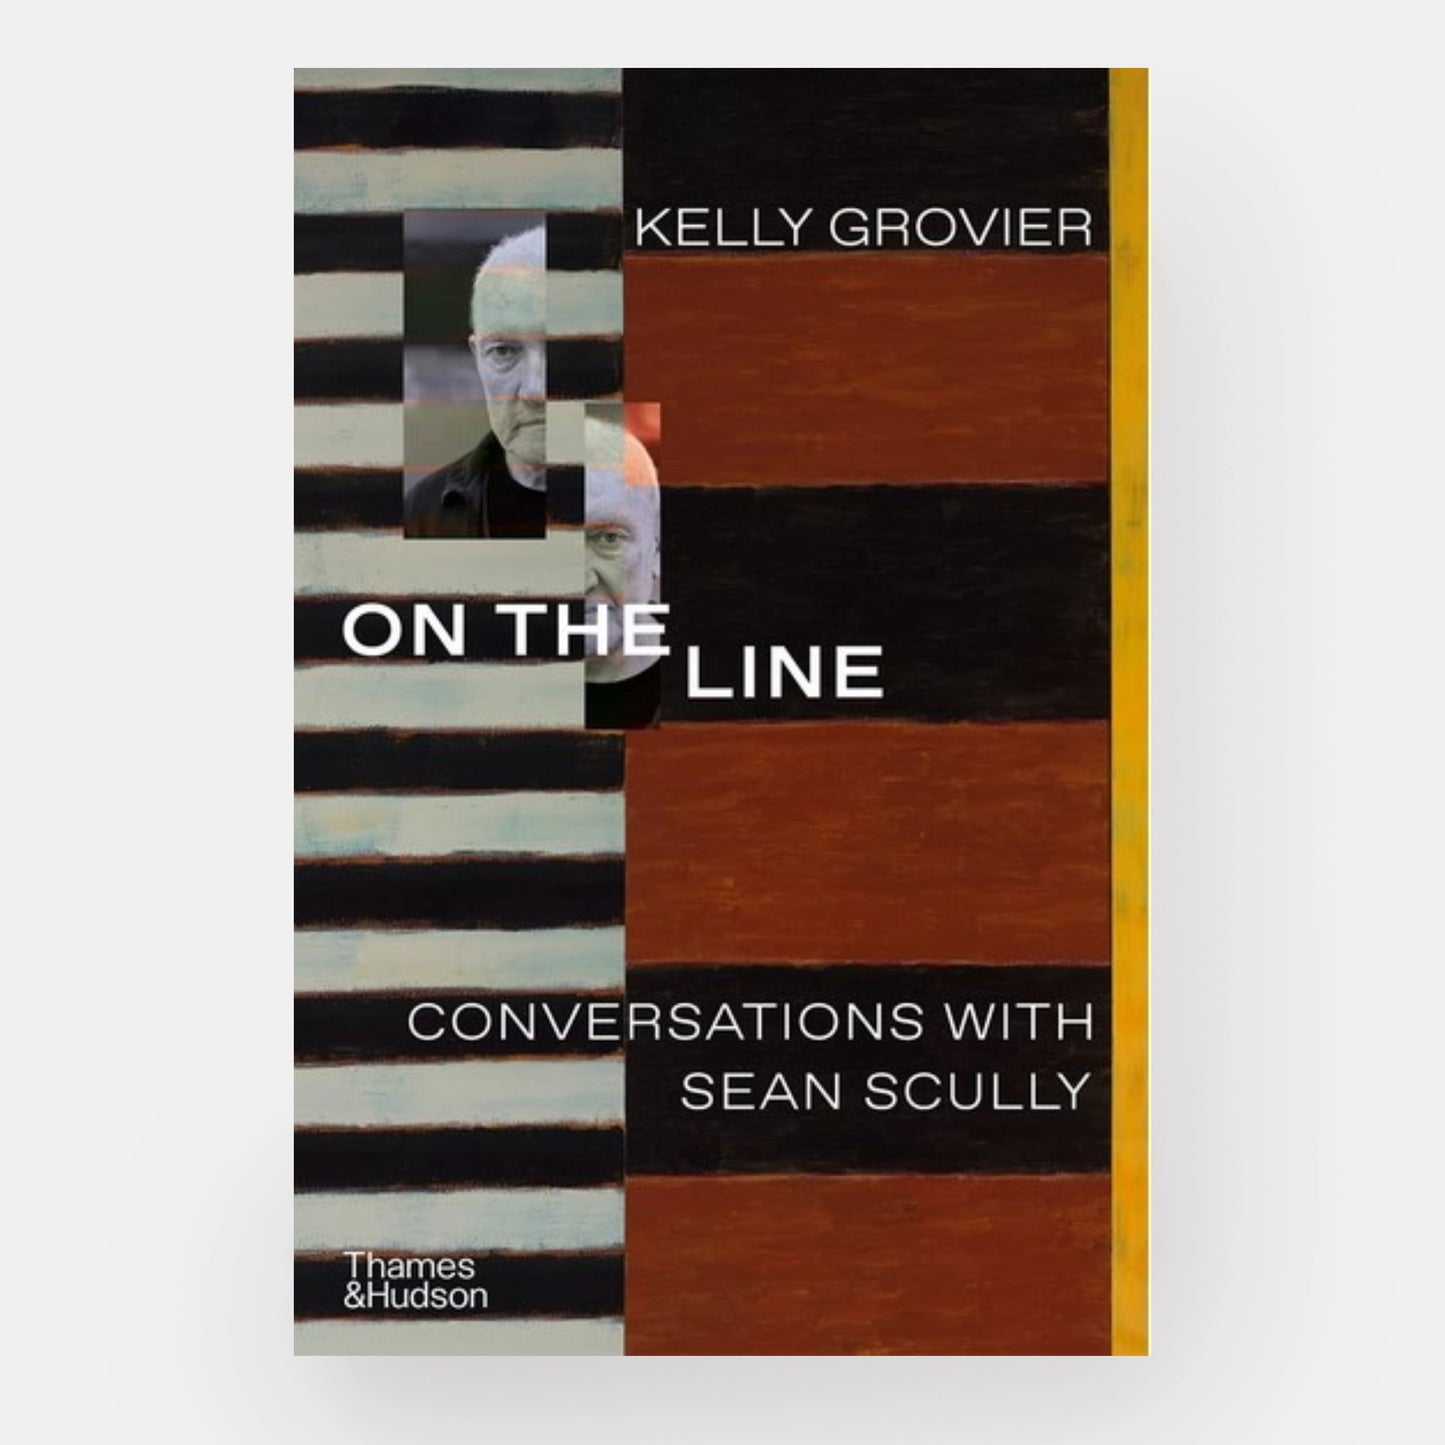 On the Line: Conversations with Sean Scully